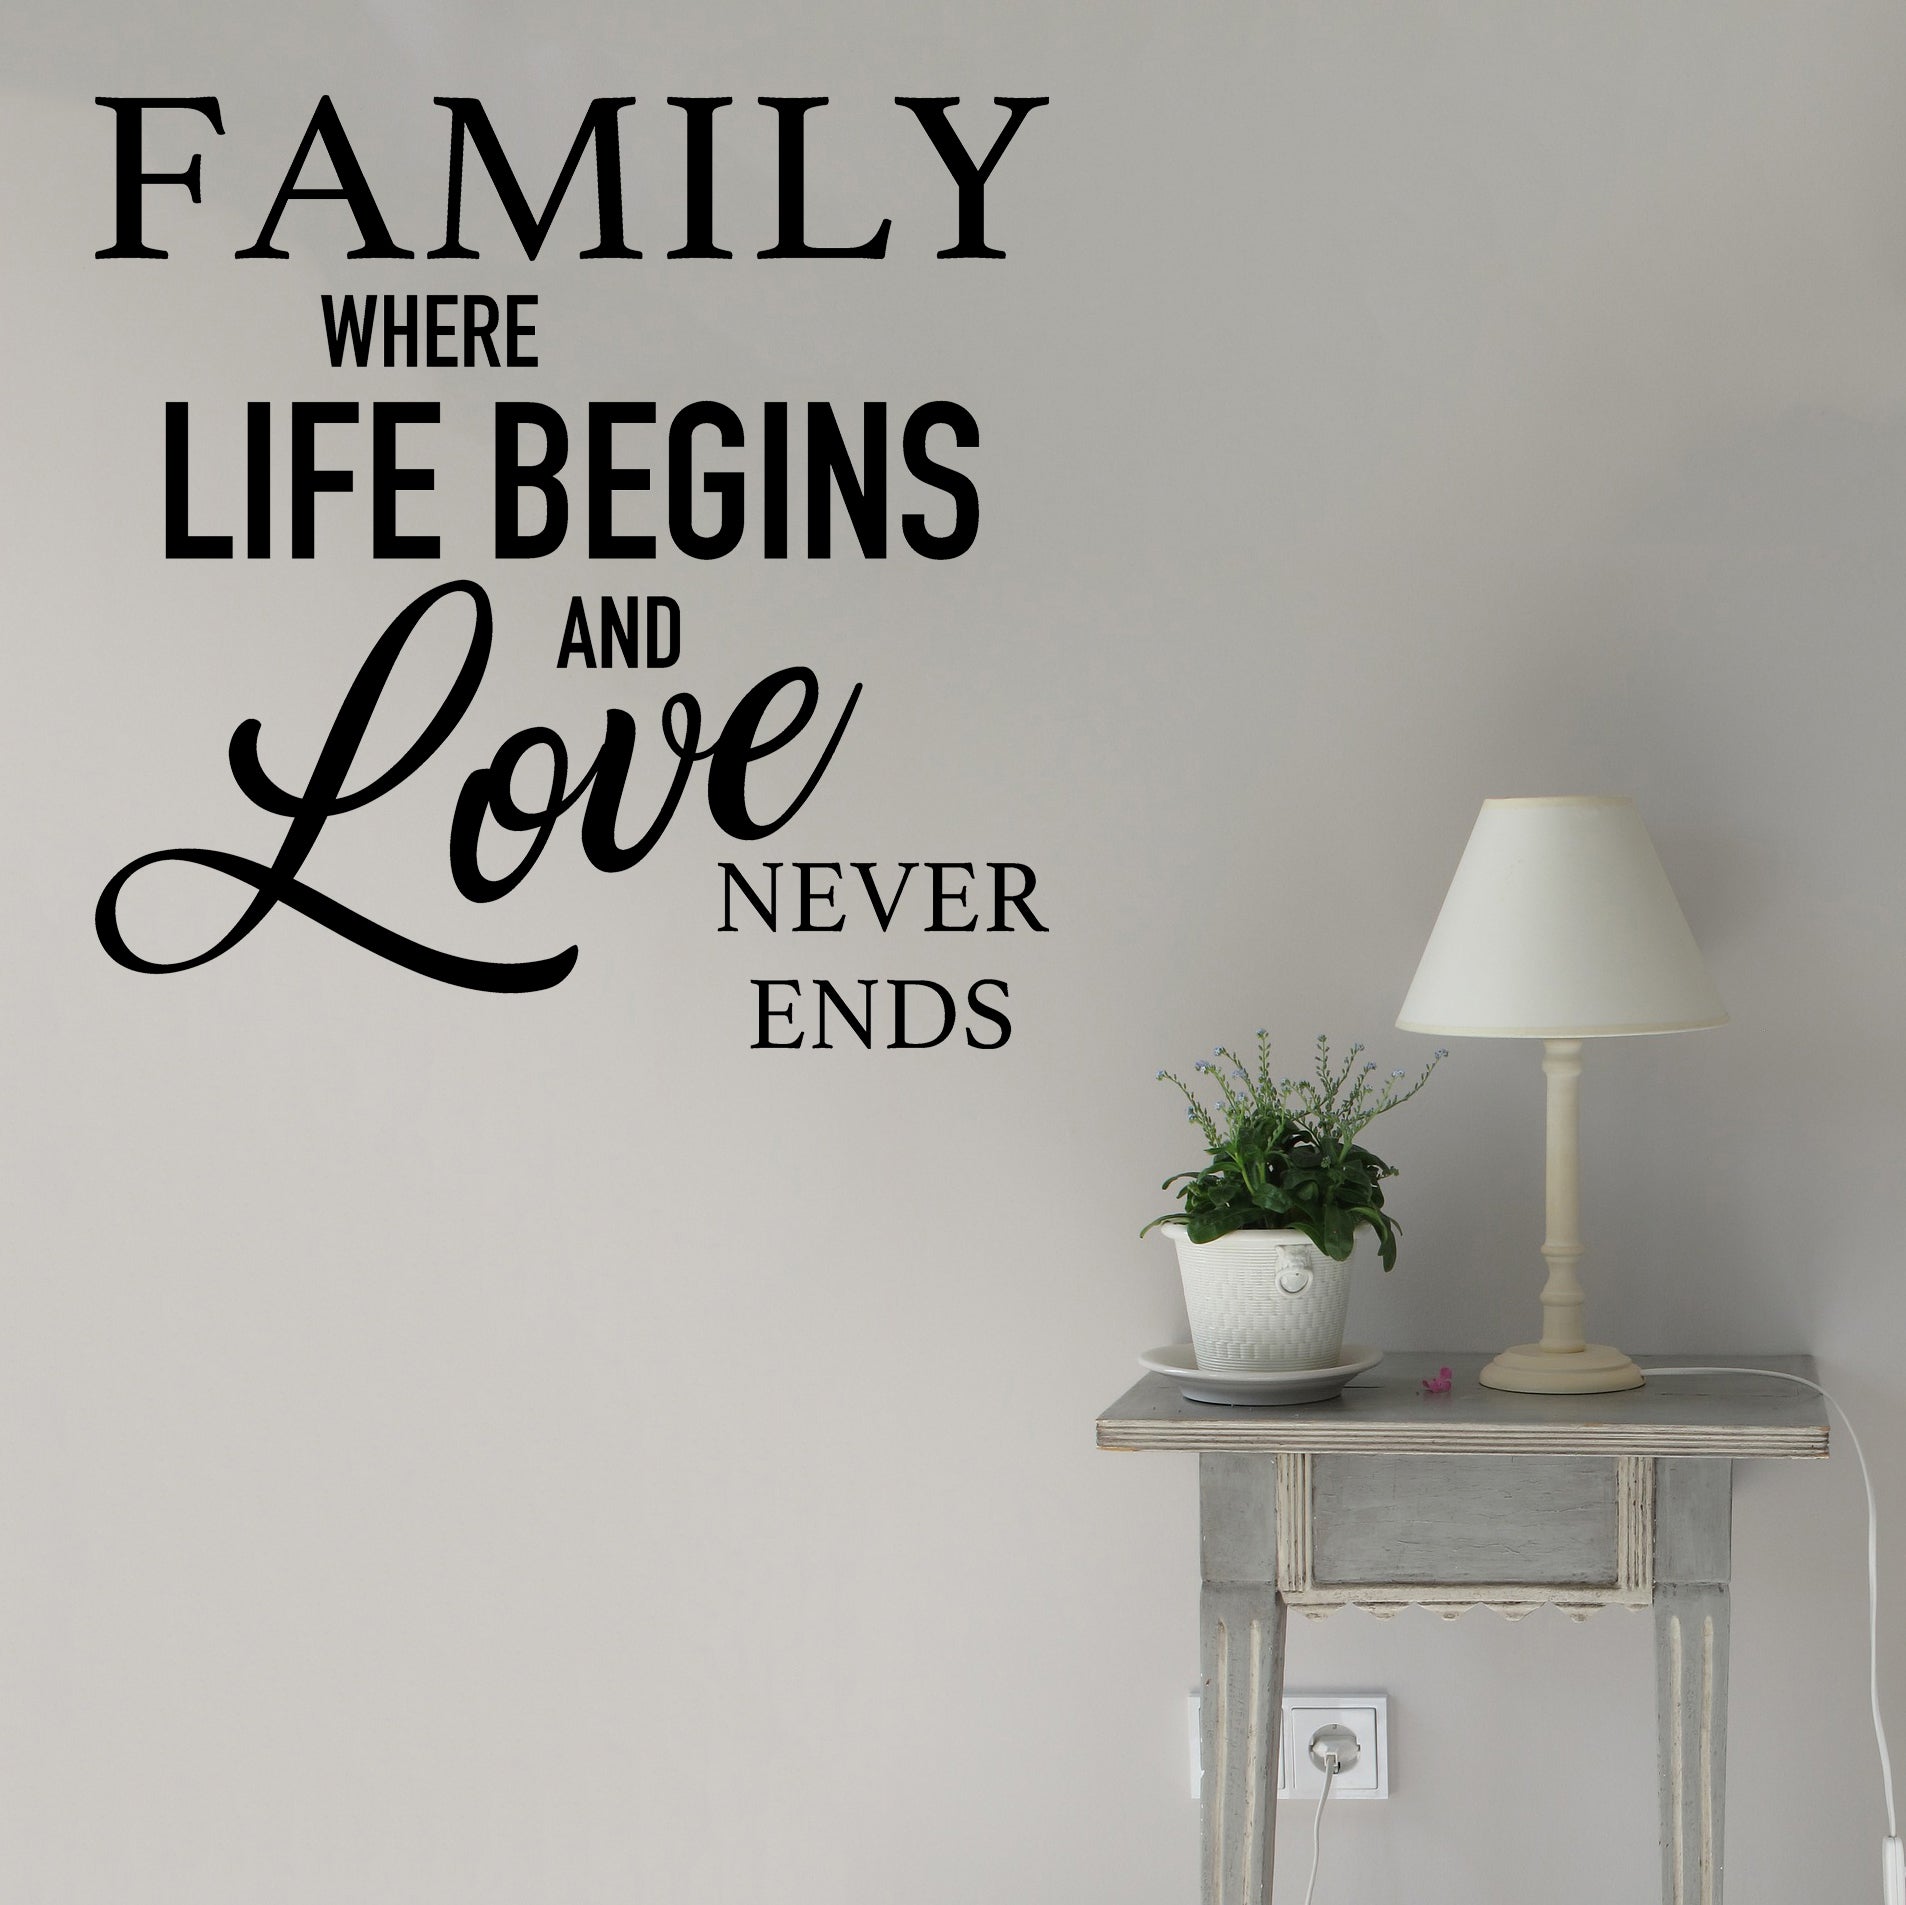 Family where life begins and love never ends | Wall quote - Adnil Creations